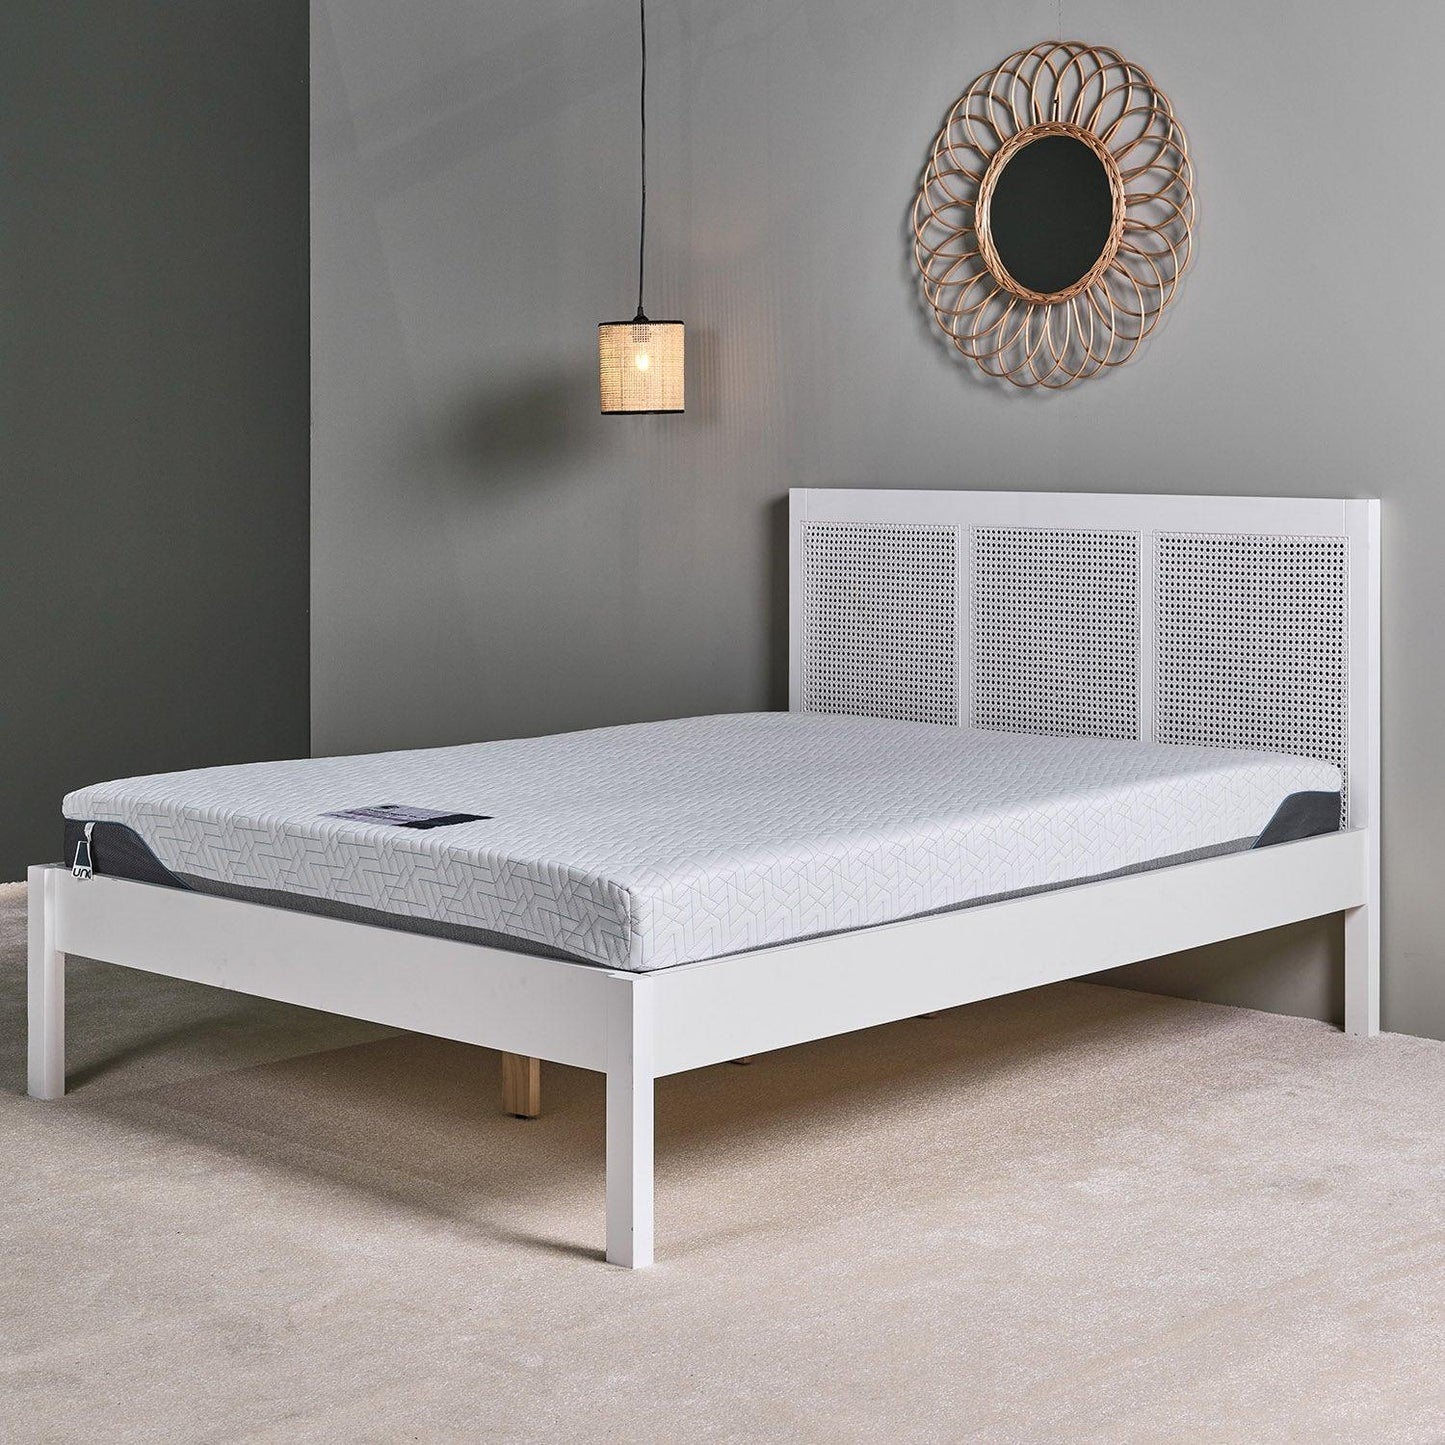 Charlie double bed - white - Laura James